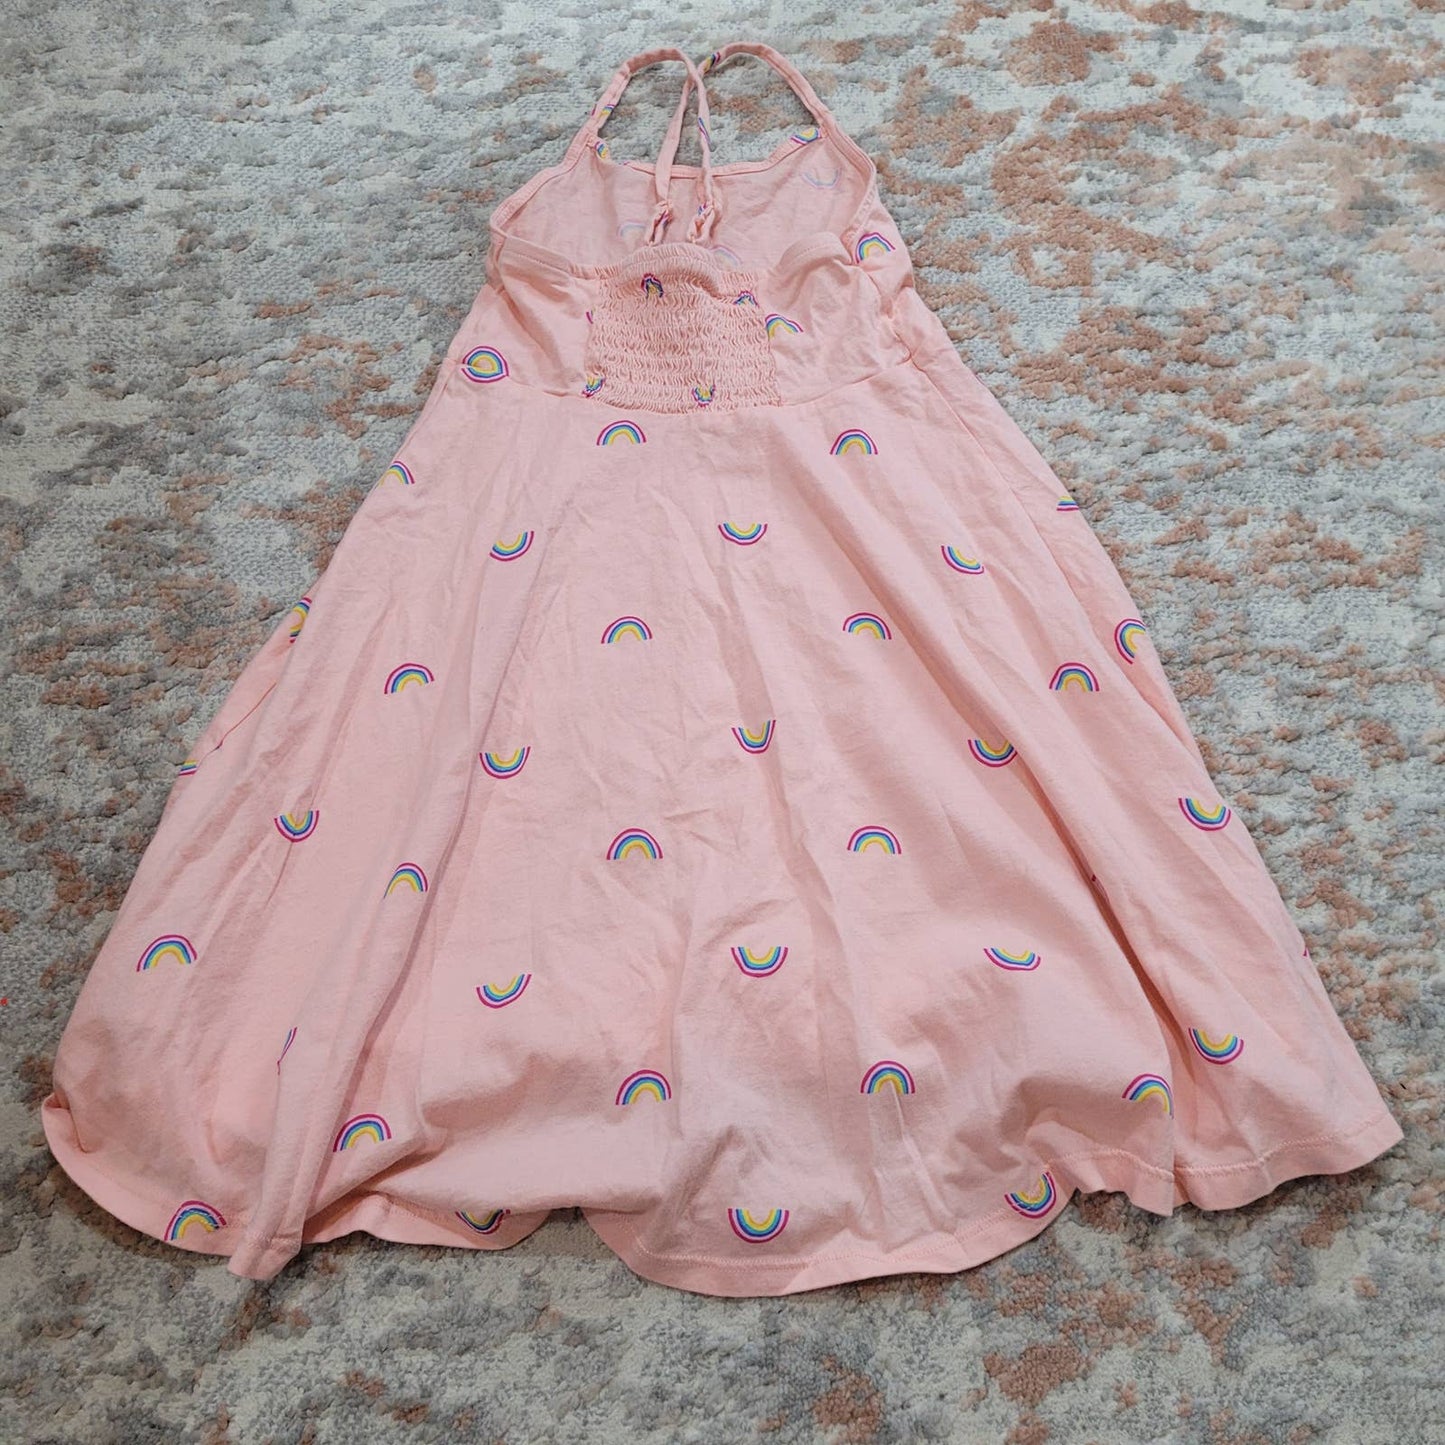 Old Navy Pink Strappy Dress with Rainbows - Size Medium